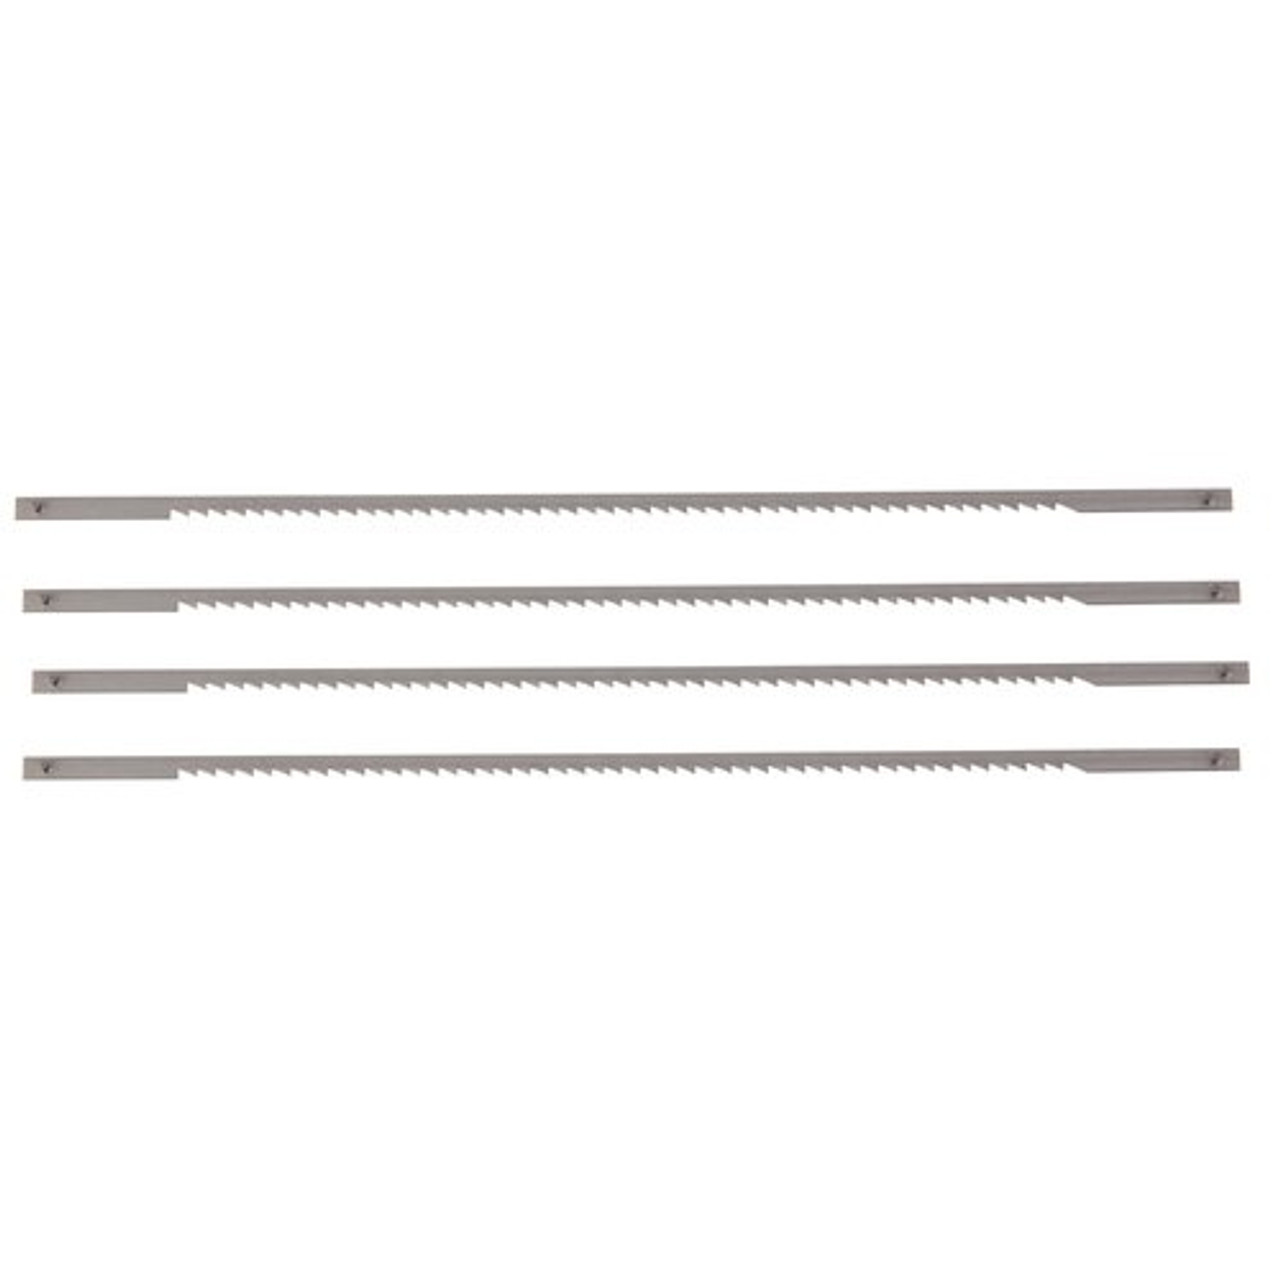 Stanley 4 pk 6-1/2 in x 10 TPI Coping Saw Blades 15-058